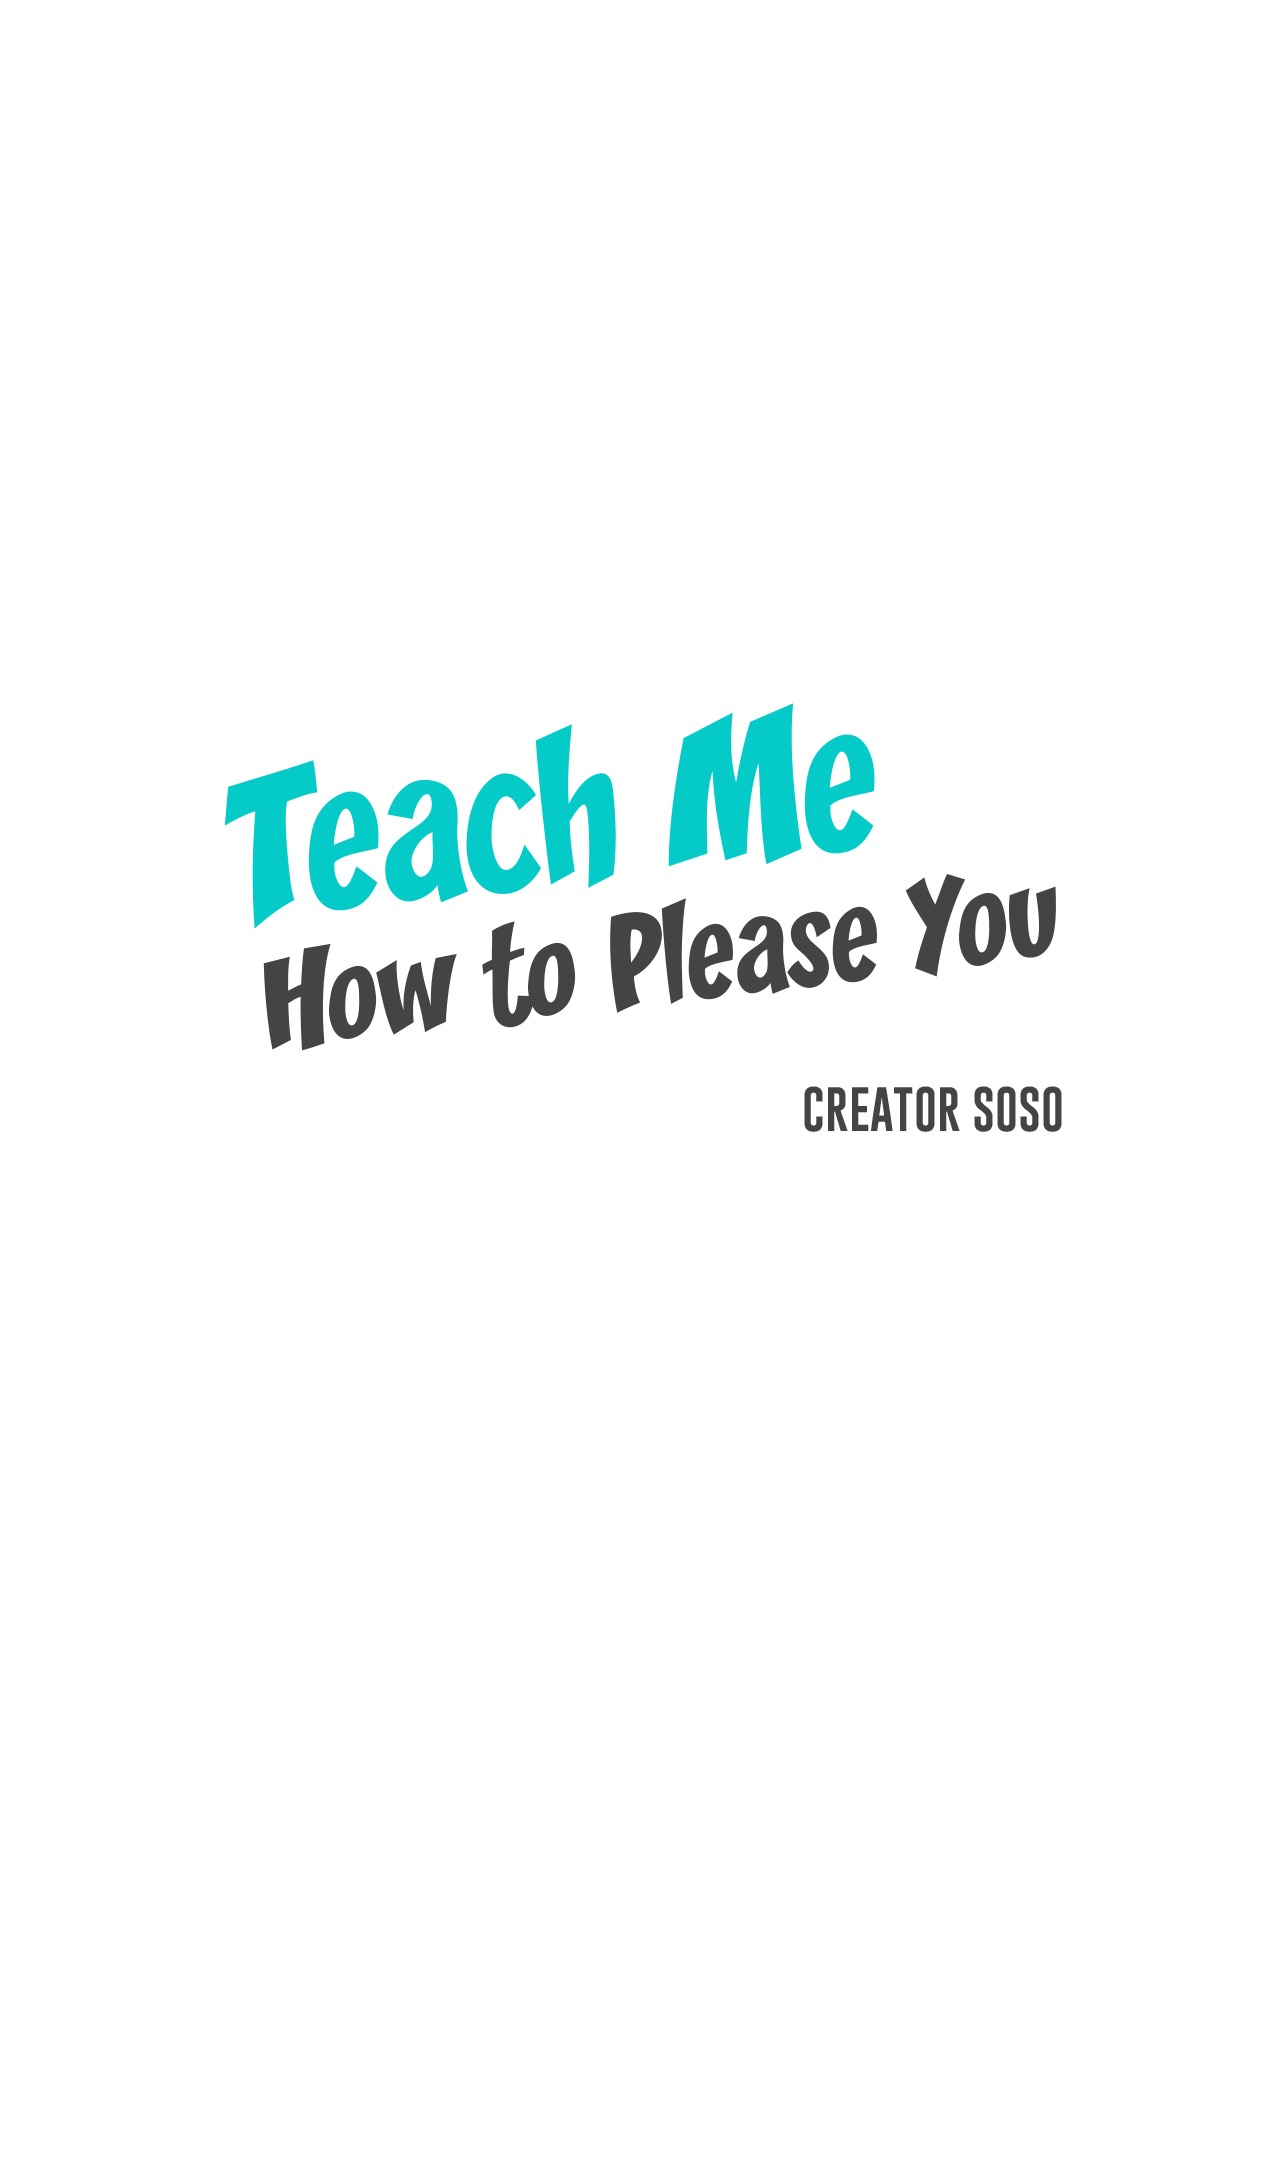 Teach Me How to Please You image